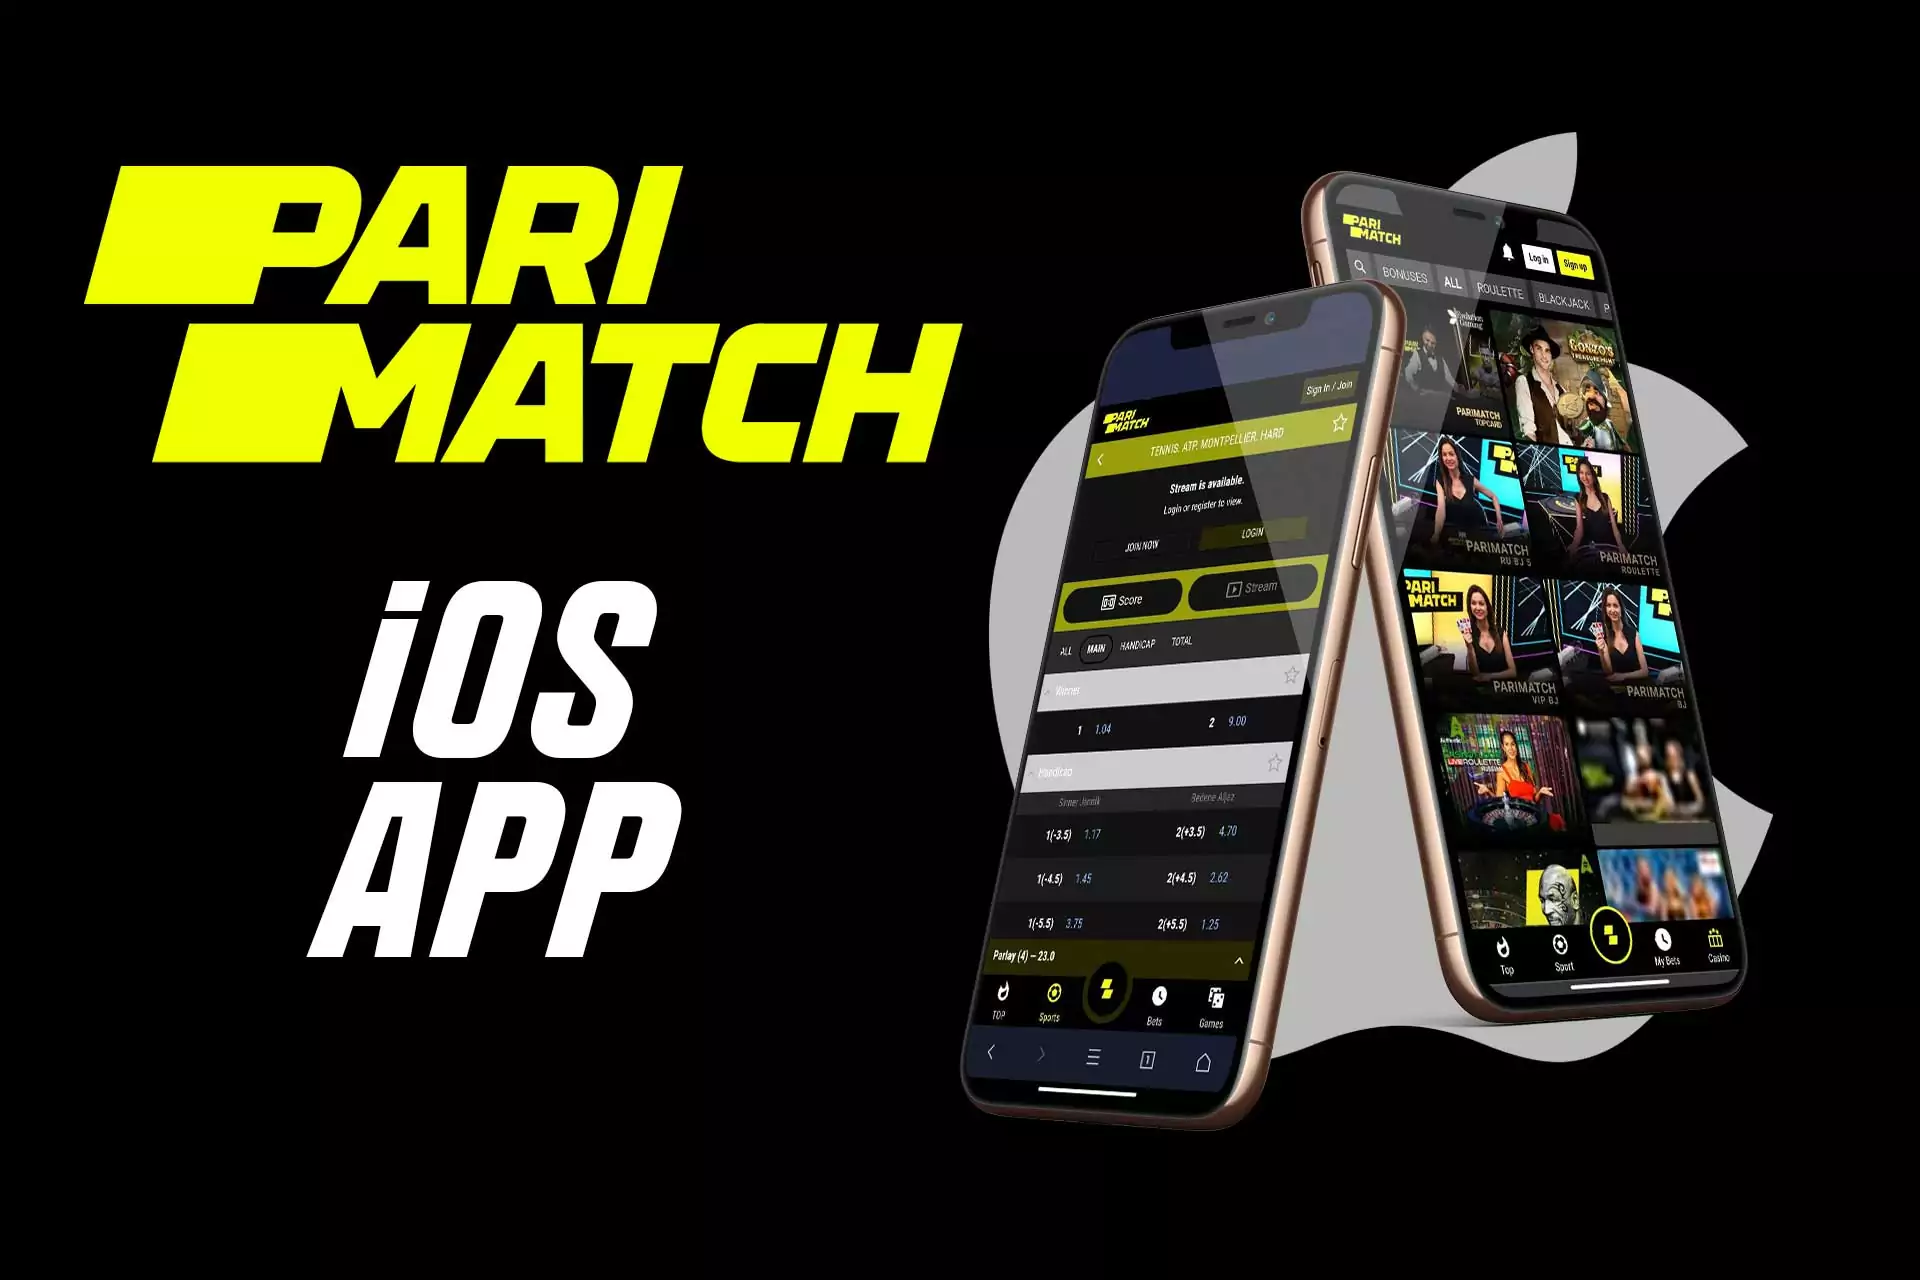 You can easily install the Parimatch app on your iPhone.